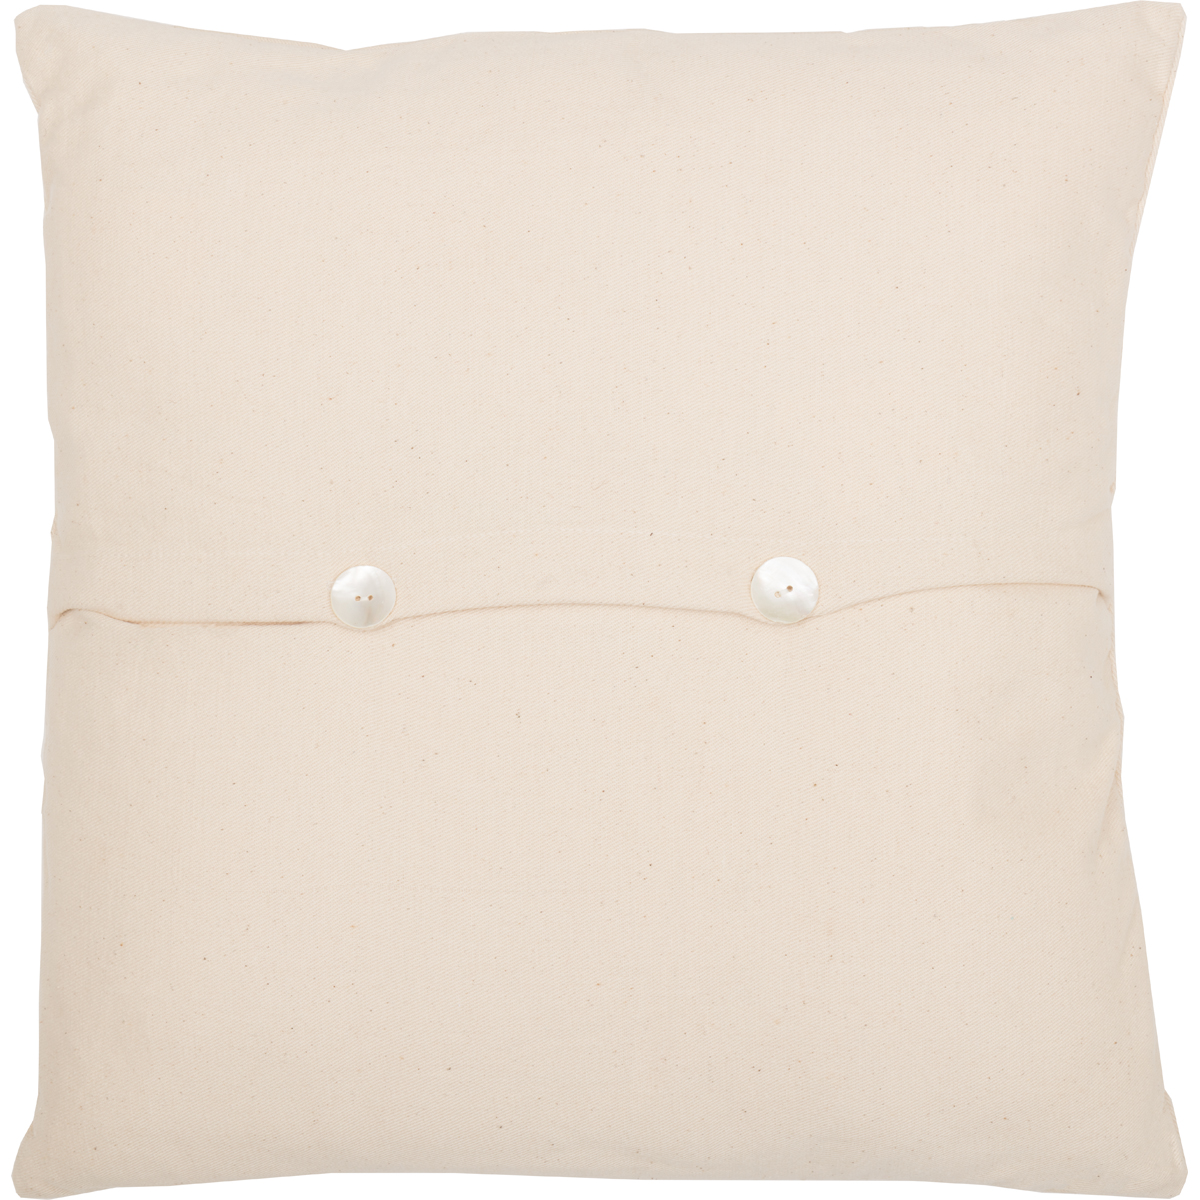 Three Pillows - Three Starfish Pillow (18x18) - The Weed Patch